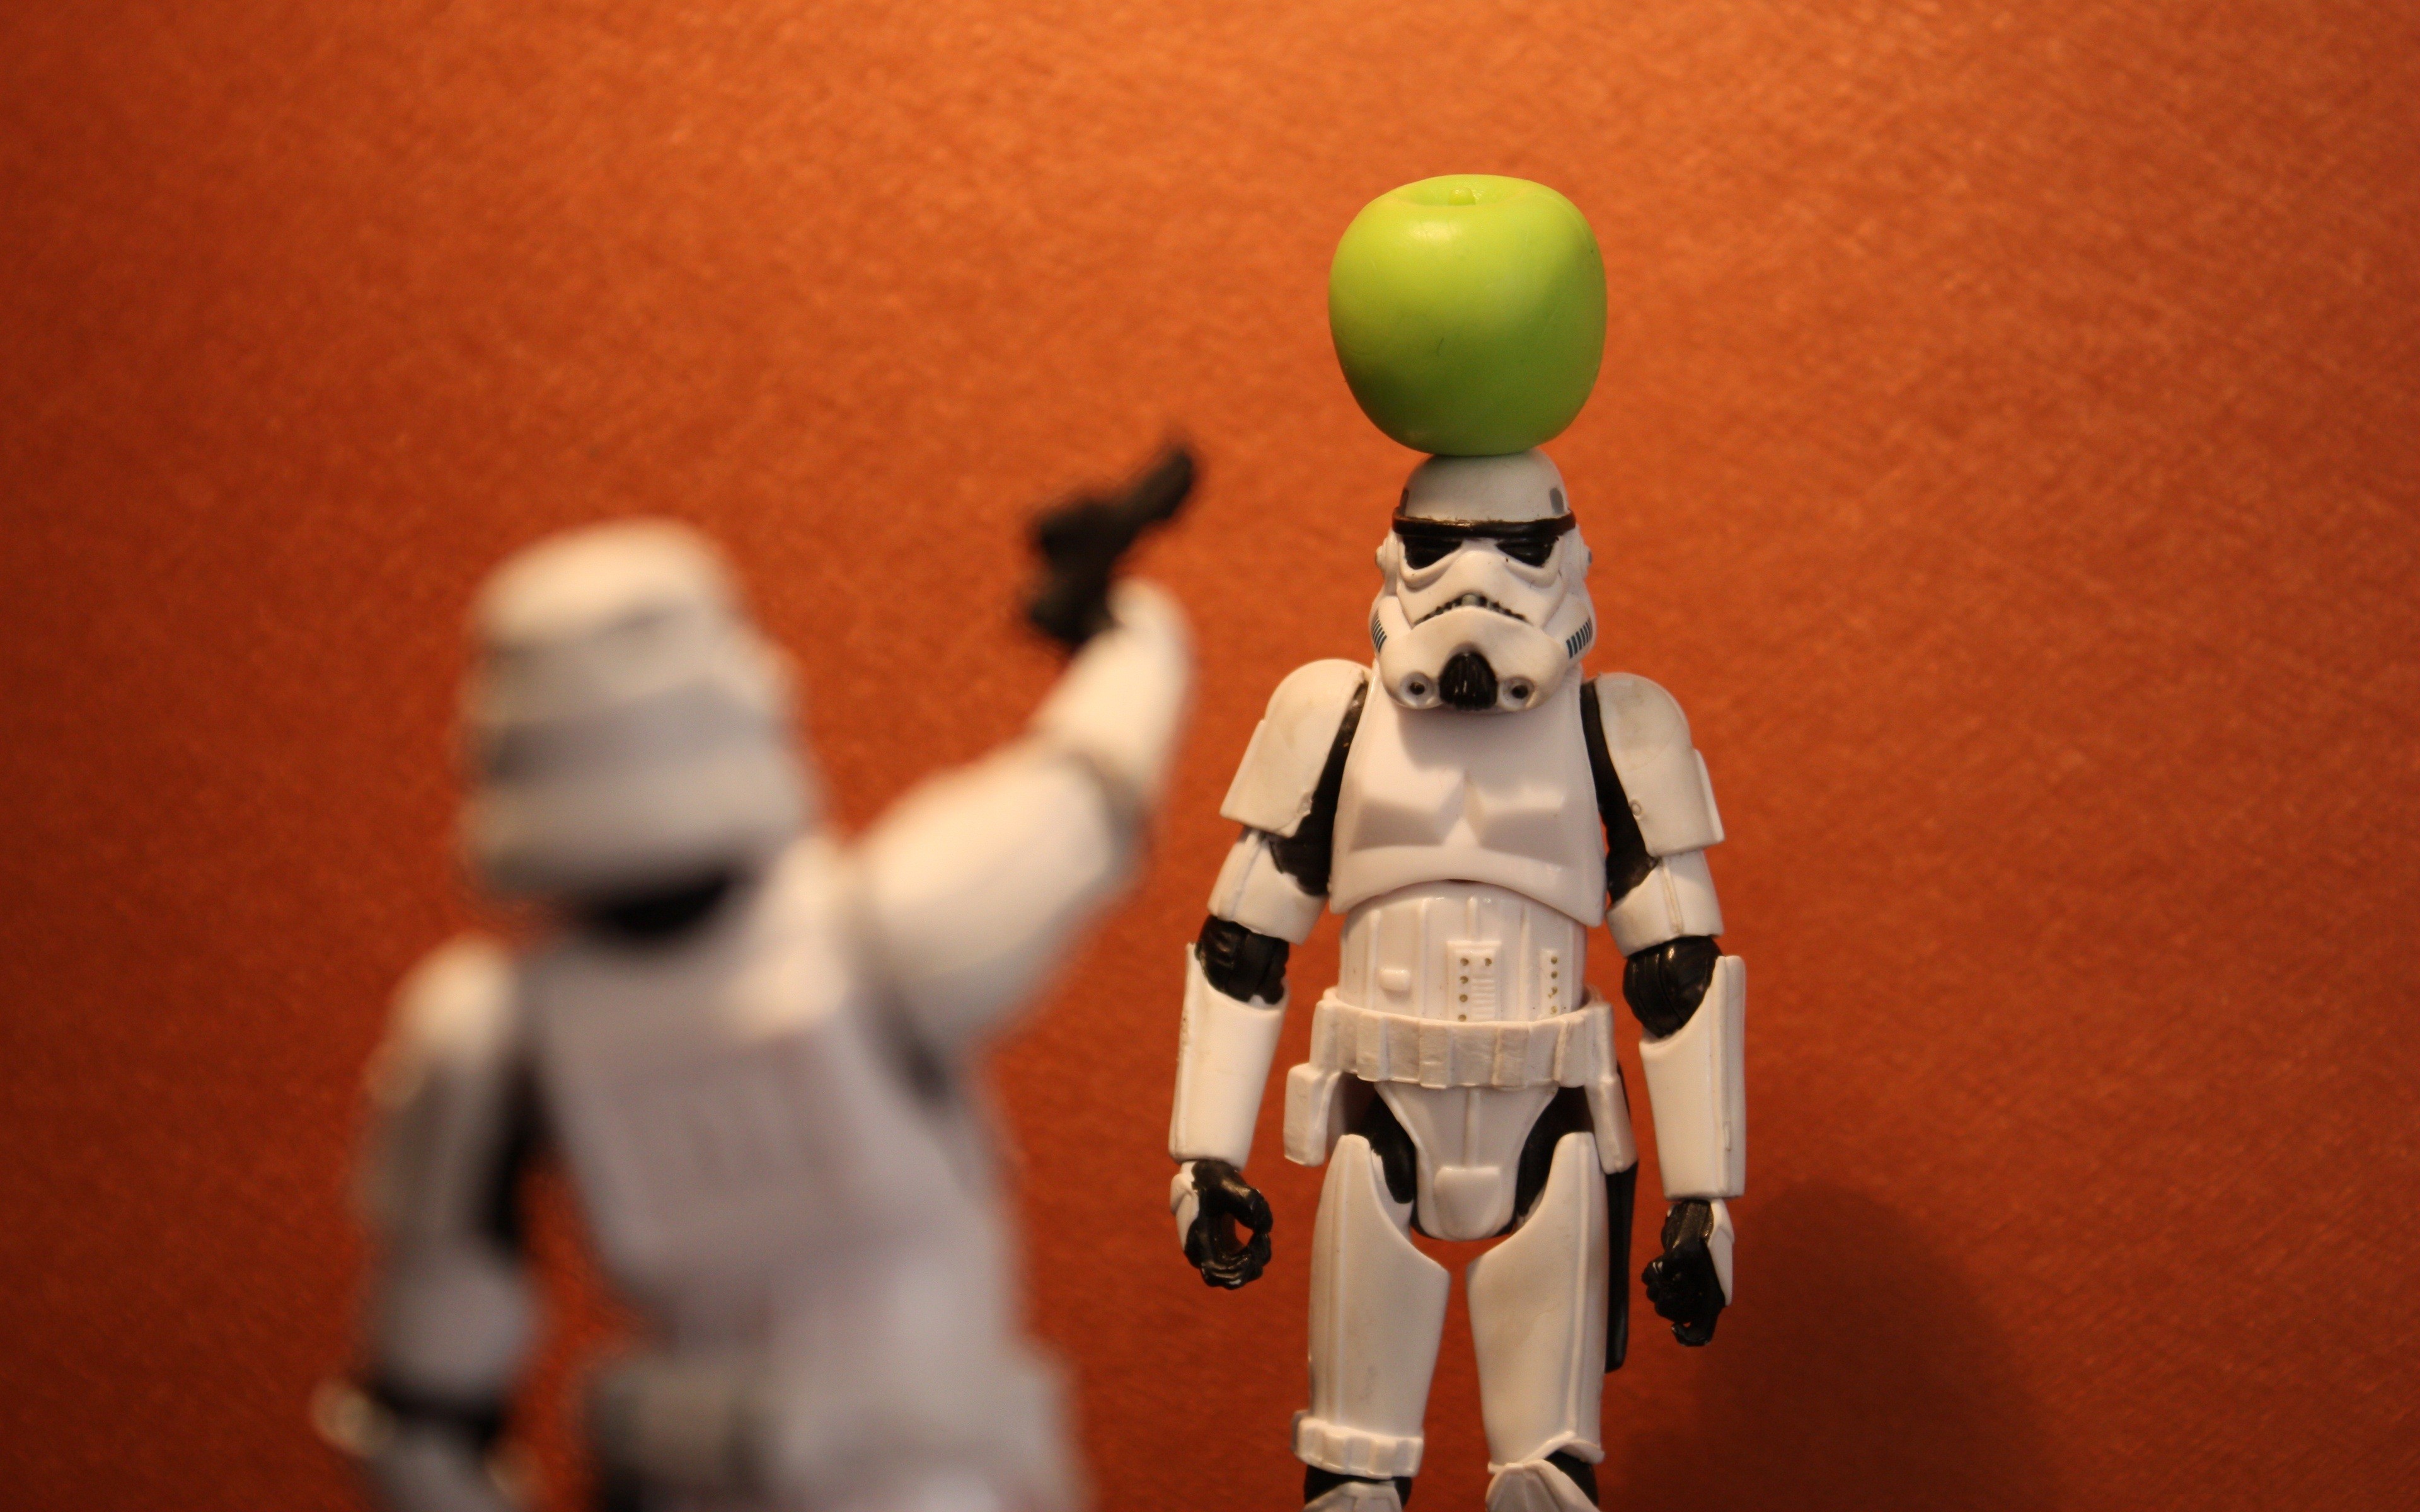 Star wars stormtroopers funny toys miniature apples wallpaper